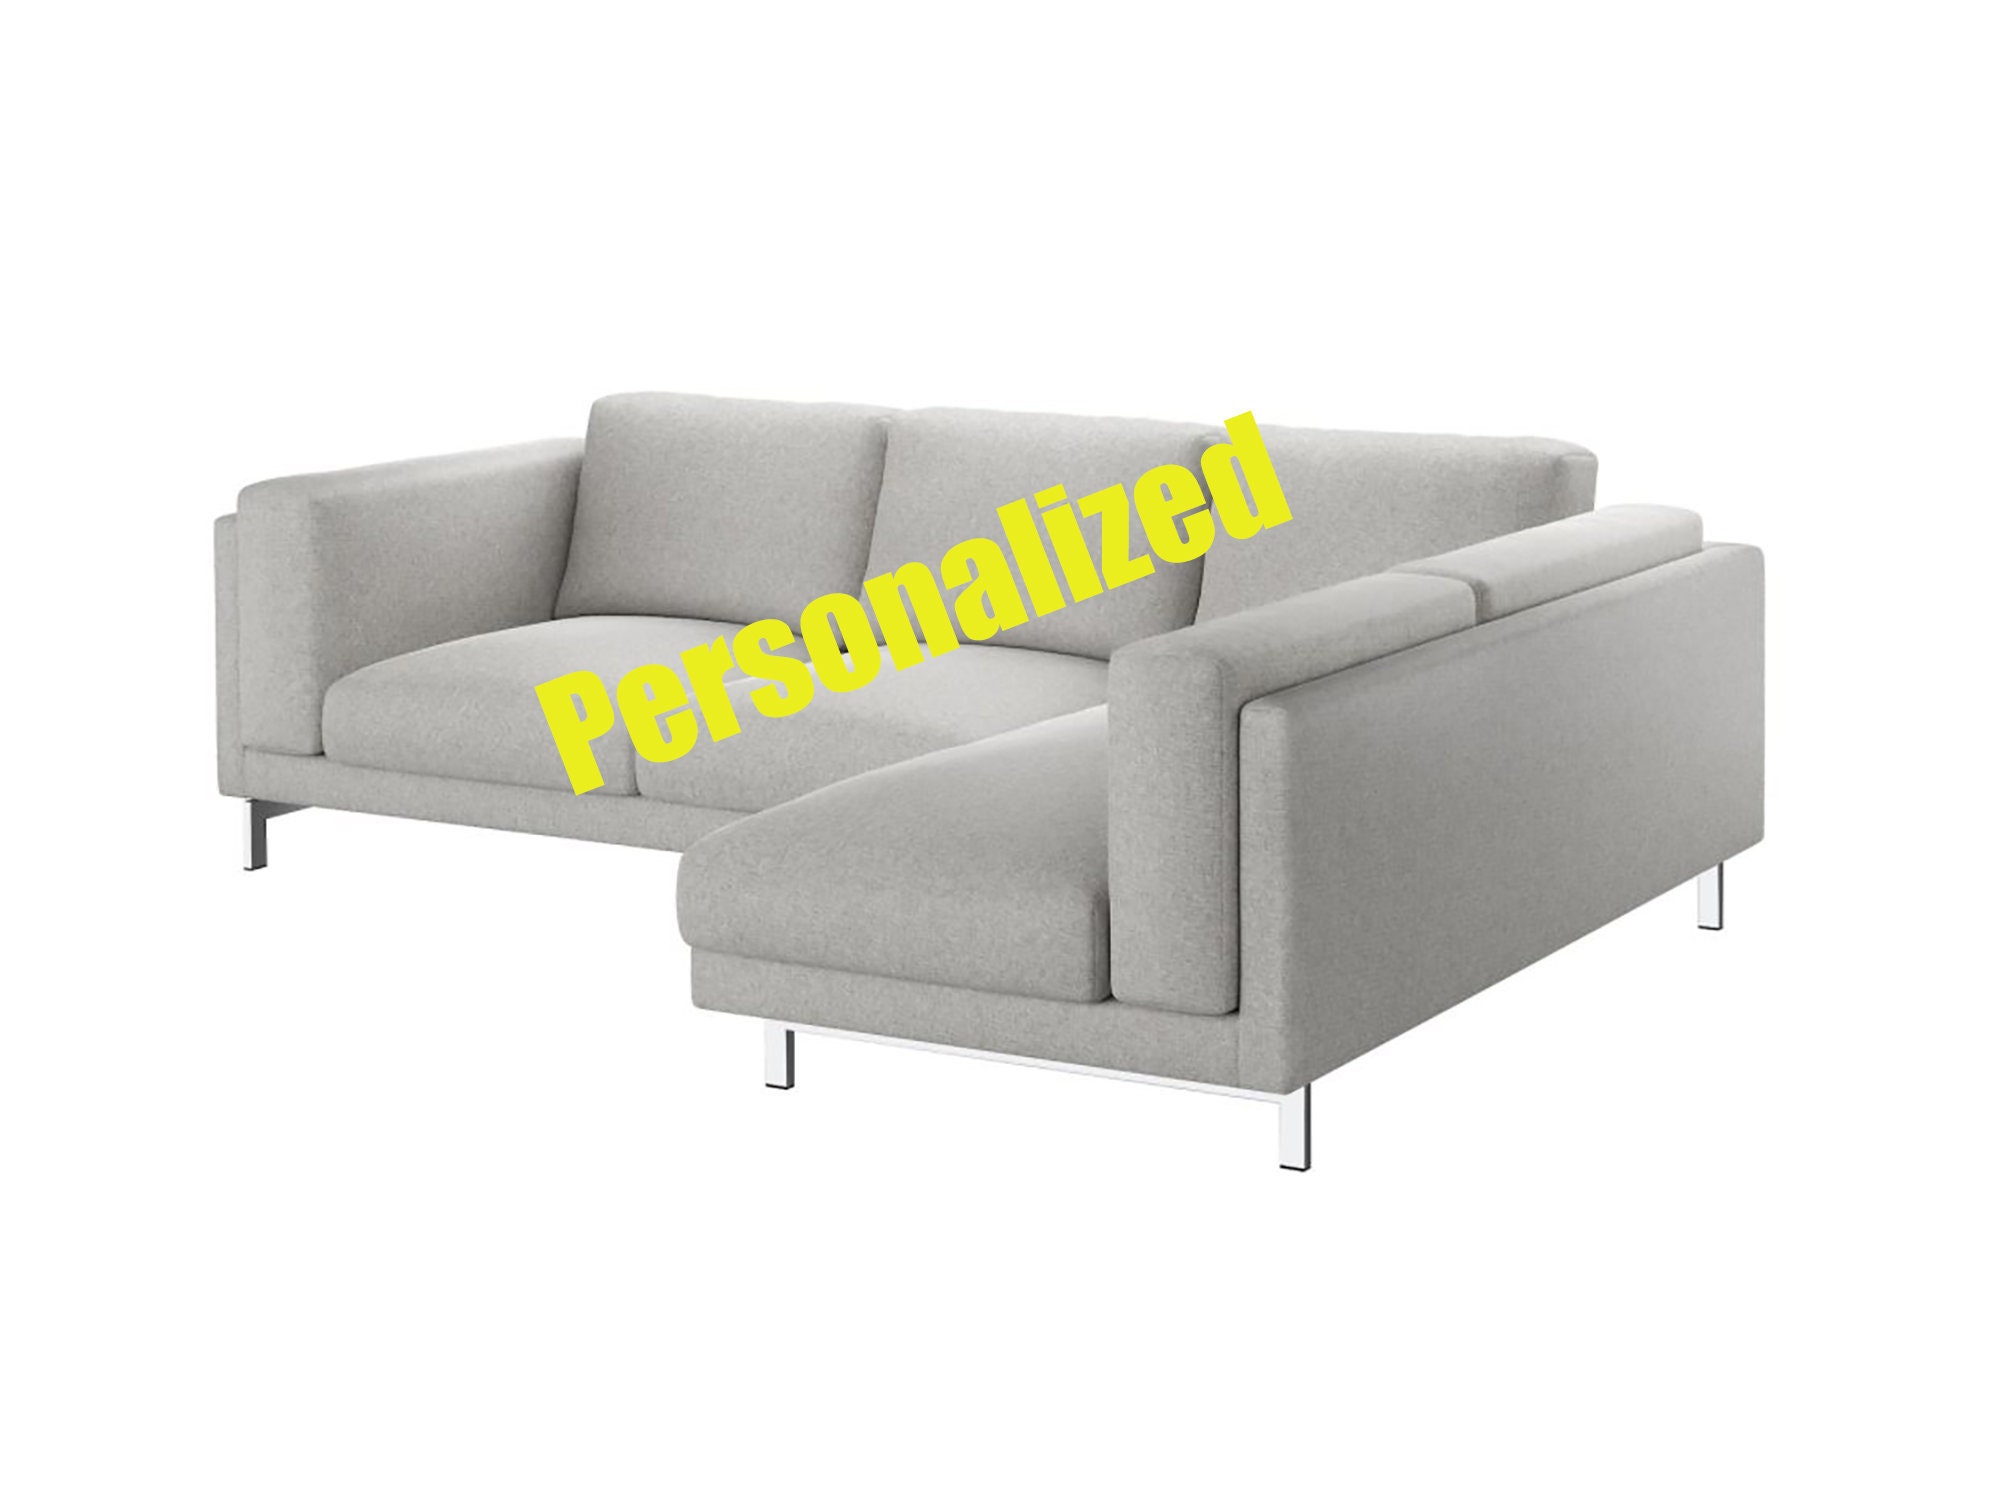 Fits SOLSTA Sofa Bed Customize Sofa Cover Replace Sofa Cover lots choices 